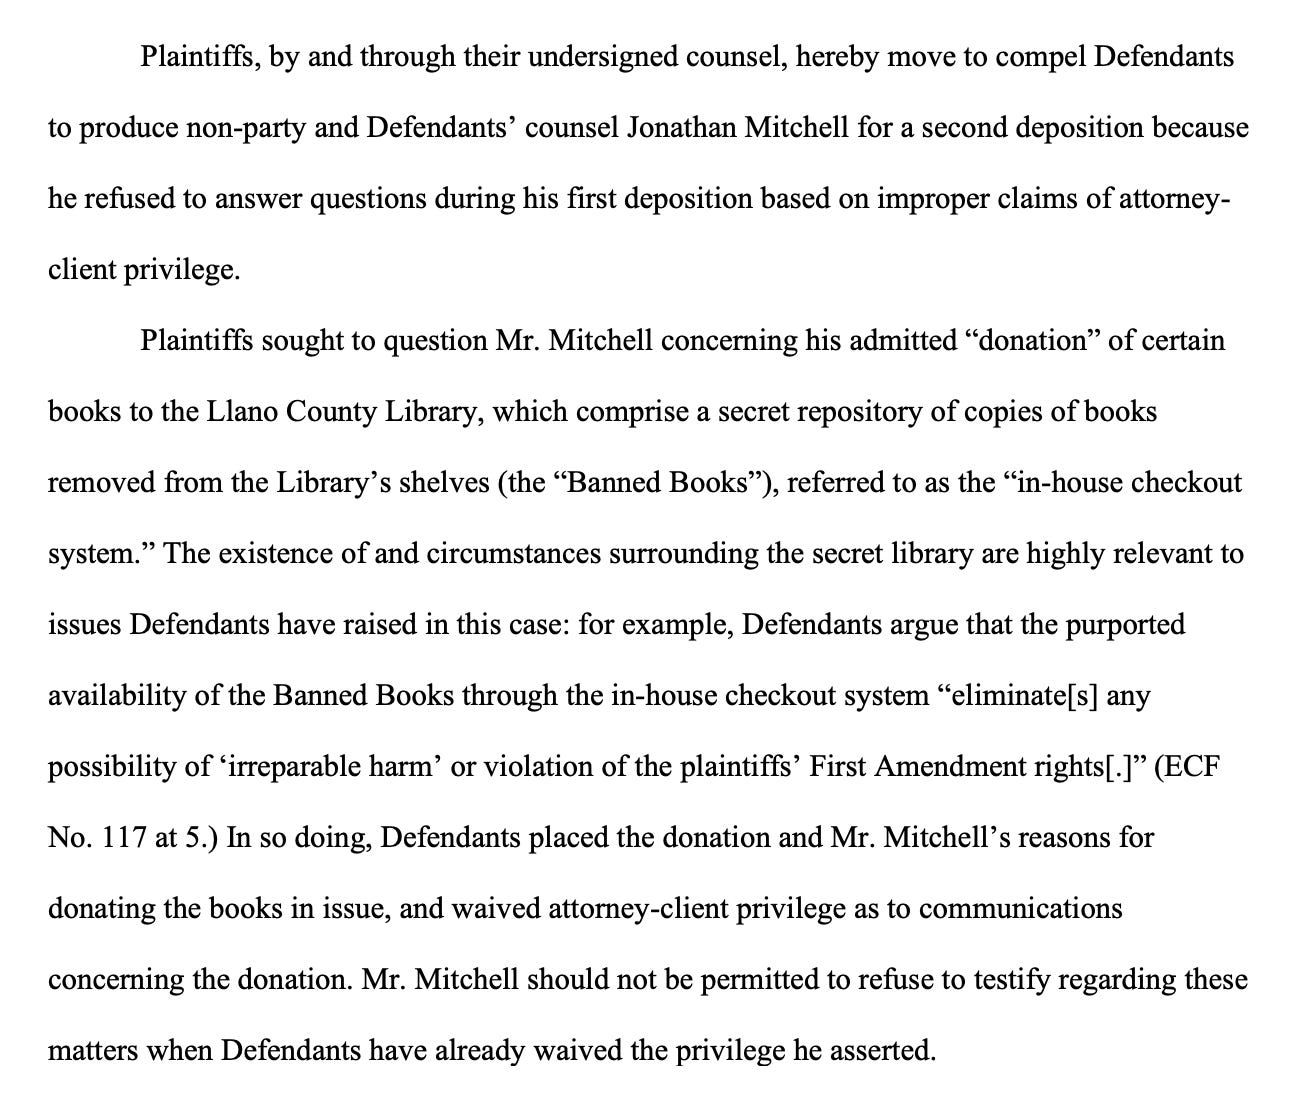 Plaintiffs, by and through their undersigned counsel, hereby move to compel Defendants to produce non-party and Defendants’ counsel Jonathan Mitchell for a second deposition because he refused to answer questions during his first deposition based on improper claims of attorneyclient privilege. Plaintiffs sought to question Mr. Mitchell concerning his admitted “donation” of certain books to the Llano County Library, which comprise a secret repository of copies of books removed from the Library’s shelves (the “Banned Books”), referred to as the “in-house checkout system.” The existence of and circumstances surrounding the secret library are highly relevant to issues Defendants have raised in this case: for example, Defendants argue that the purported availability of the Banned Books through the in-house checkout system “eliminate[s] any possibility of ‘irreparable harm’ or violation of the plaintiffs’ First Amendment rights[.]” (ECF No. 117 at 5.) In so doing, Defendants placed the donation and Mr. Mitchell’s reasons for donating the books in issue, and waived attorney-client privilege as to communications concerning the donation. Mr. Mitchell should not be permitted to refuse to testify regarding these matters when Defendants have already waived the privilege he asserted.